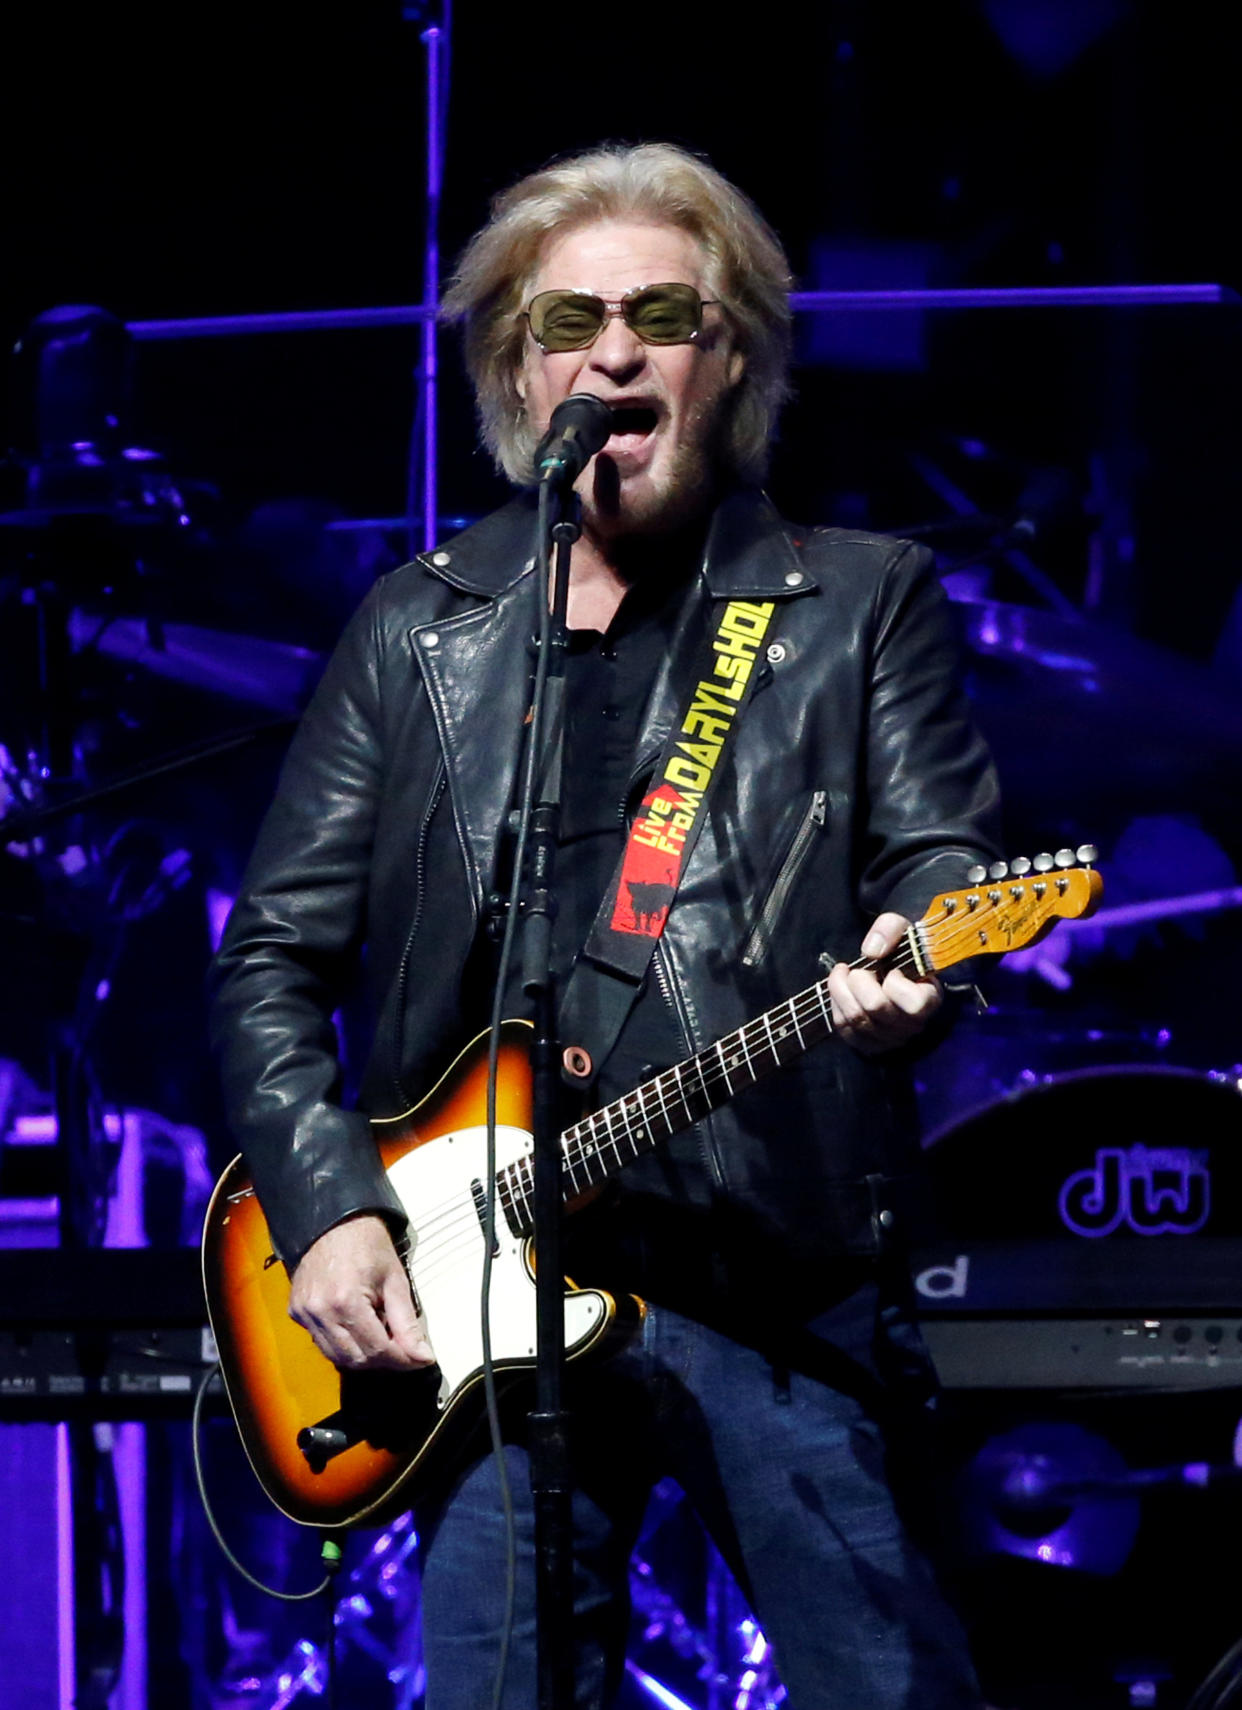 Daryl Hall performs at the Staples Center in Los Angeles in 2017. (Photo: Reuters/Mario Anzuoni)